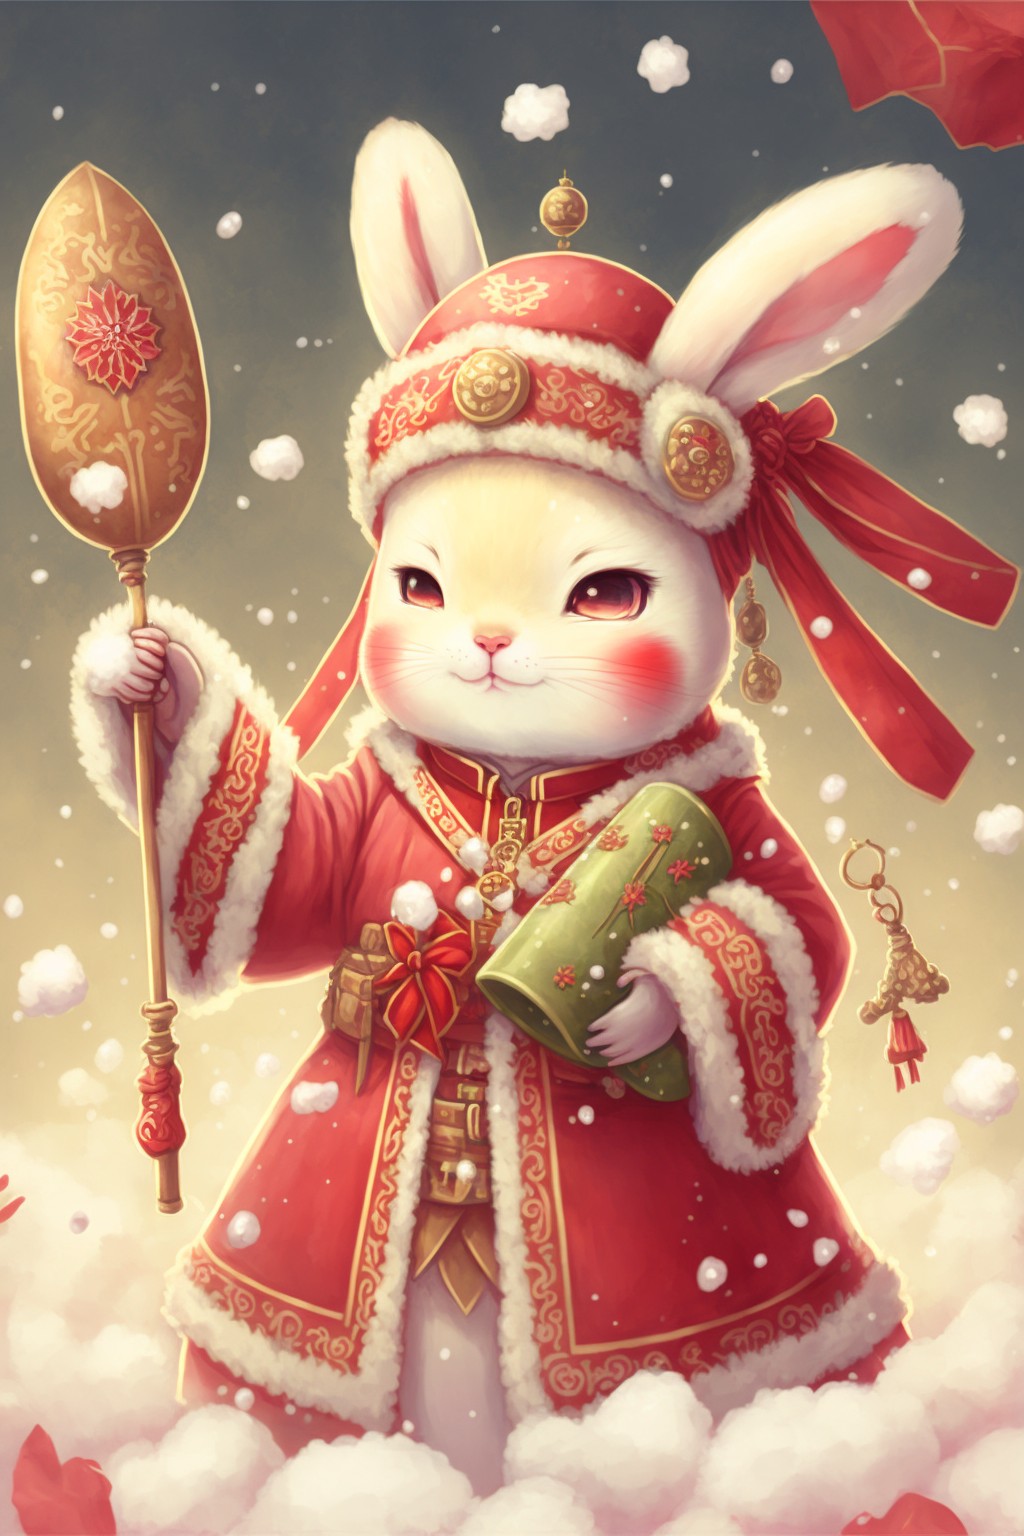 The cute bunny is here to give you a gift